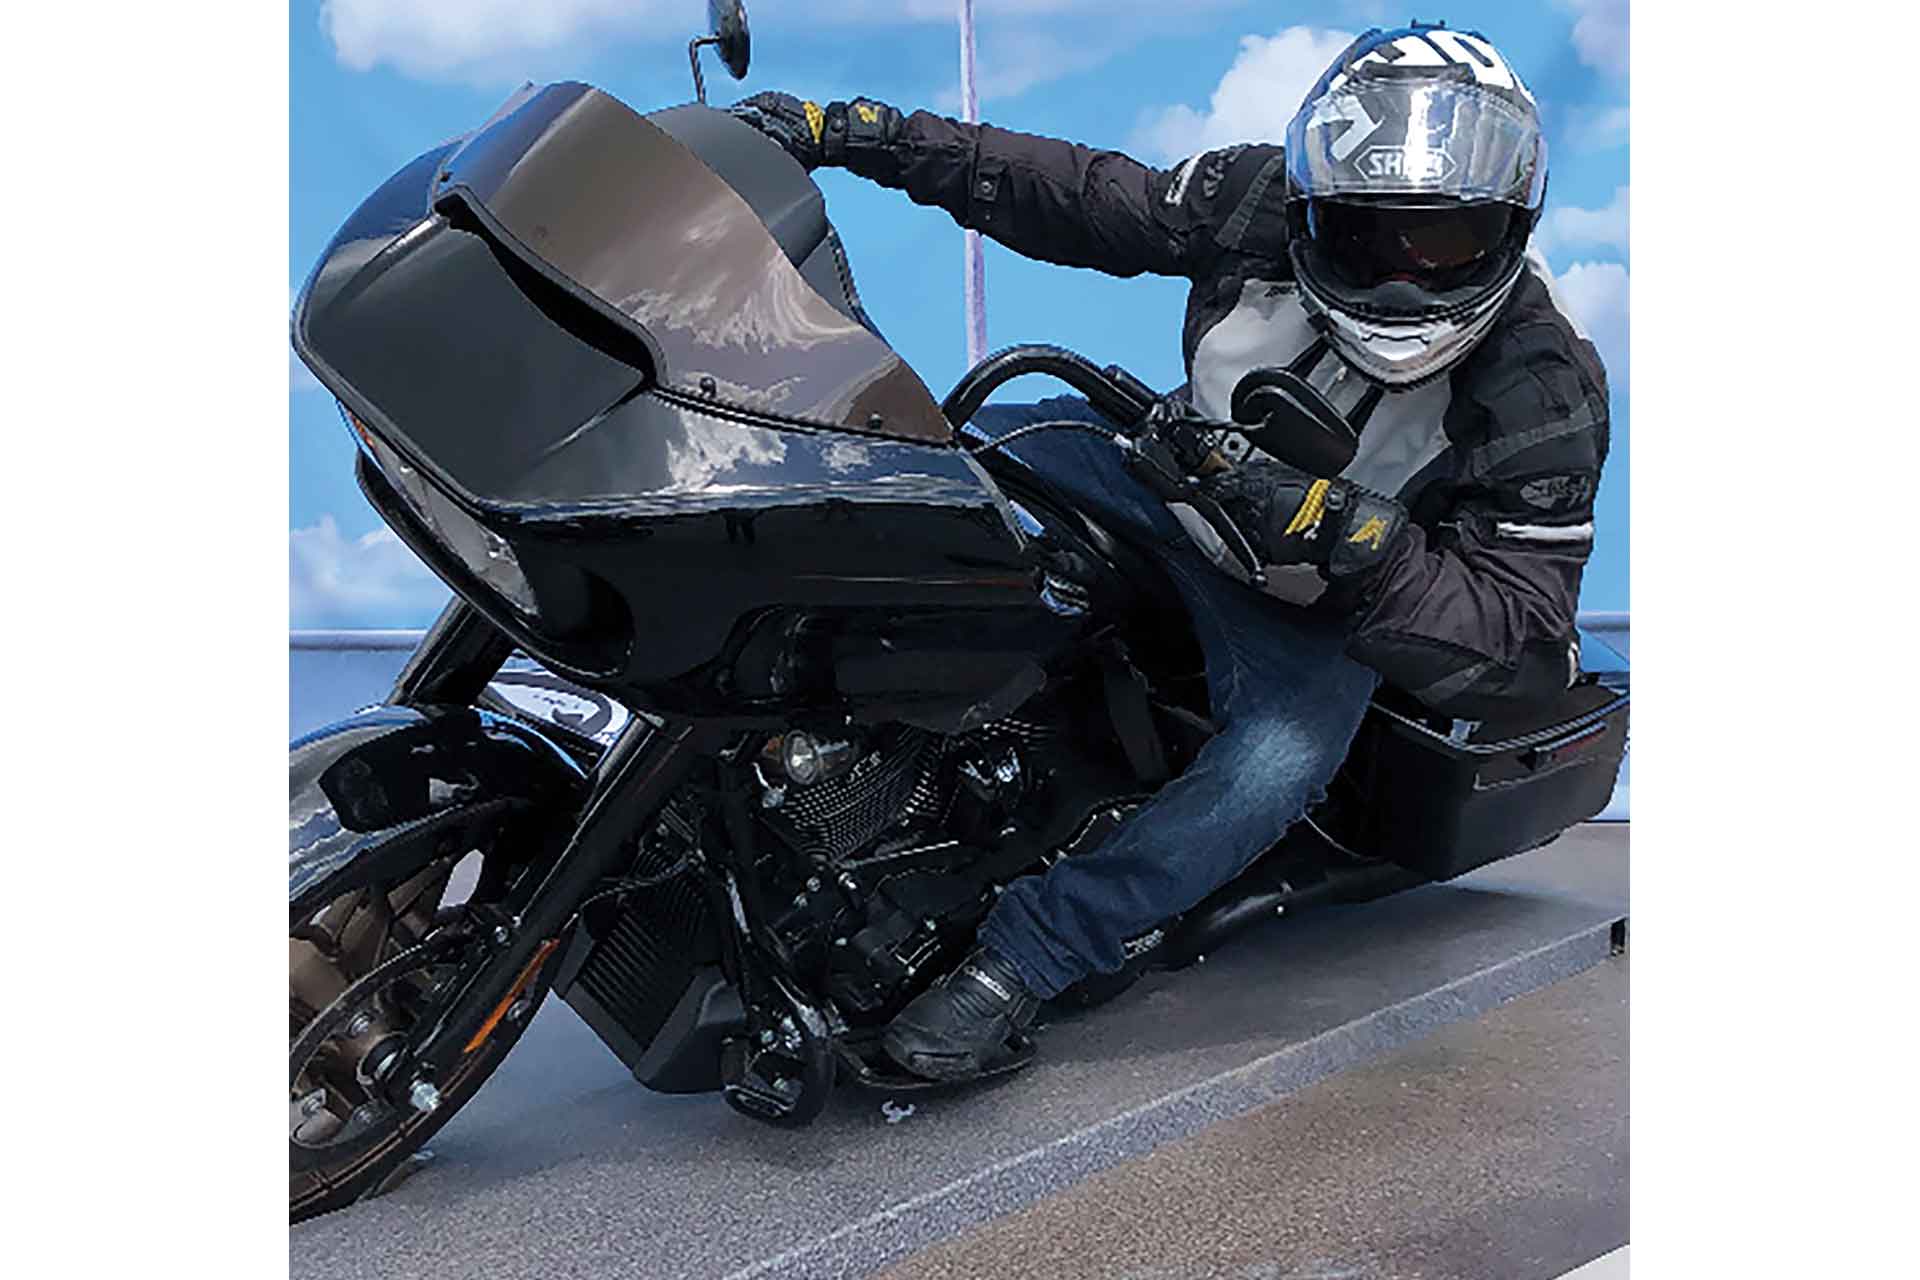 A rider on a motorcycle simulator.